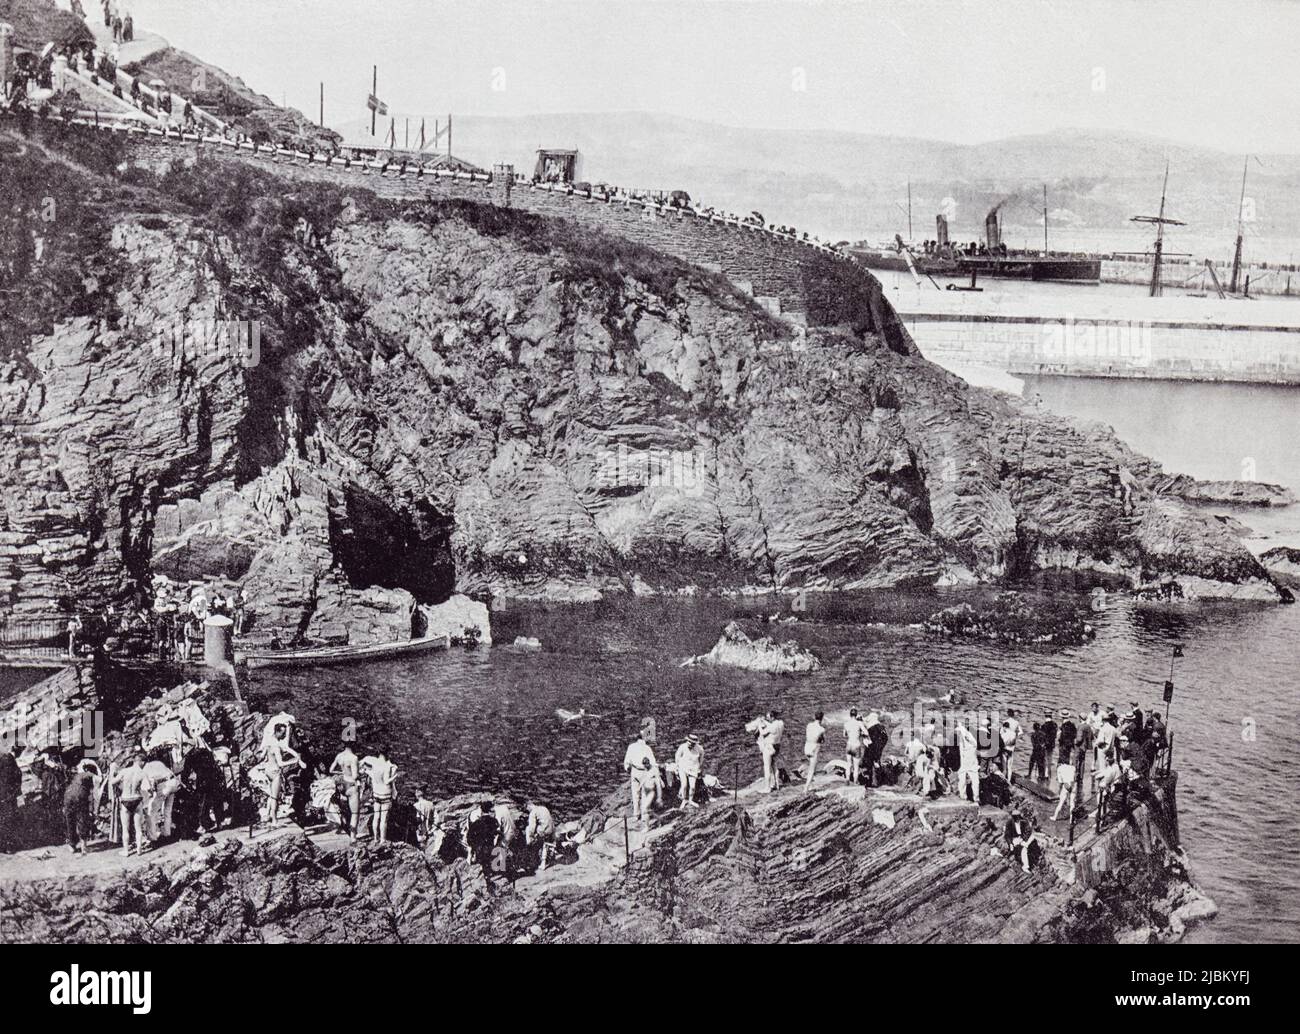 Douglas, Isle of Man. The bathing place at Port Skillion, seen here in the 19th century.  From Around The Coast,  An Album of Pictures from Photographs of the Chief Seaside Places of Interest in Great Britain and Ireland published London, 1895, by George Newnes Limited. Stock Photo